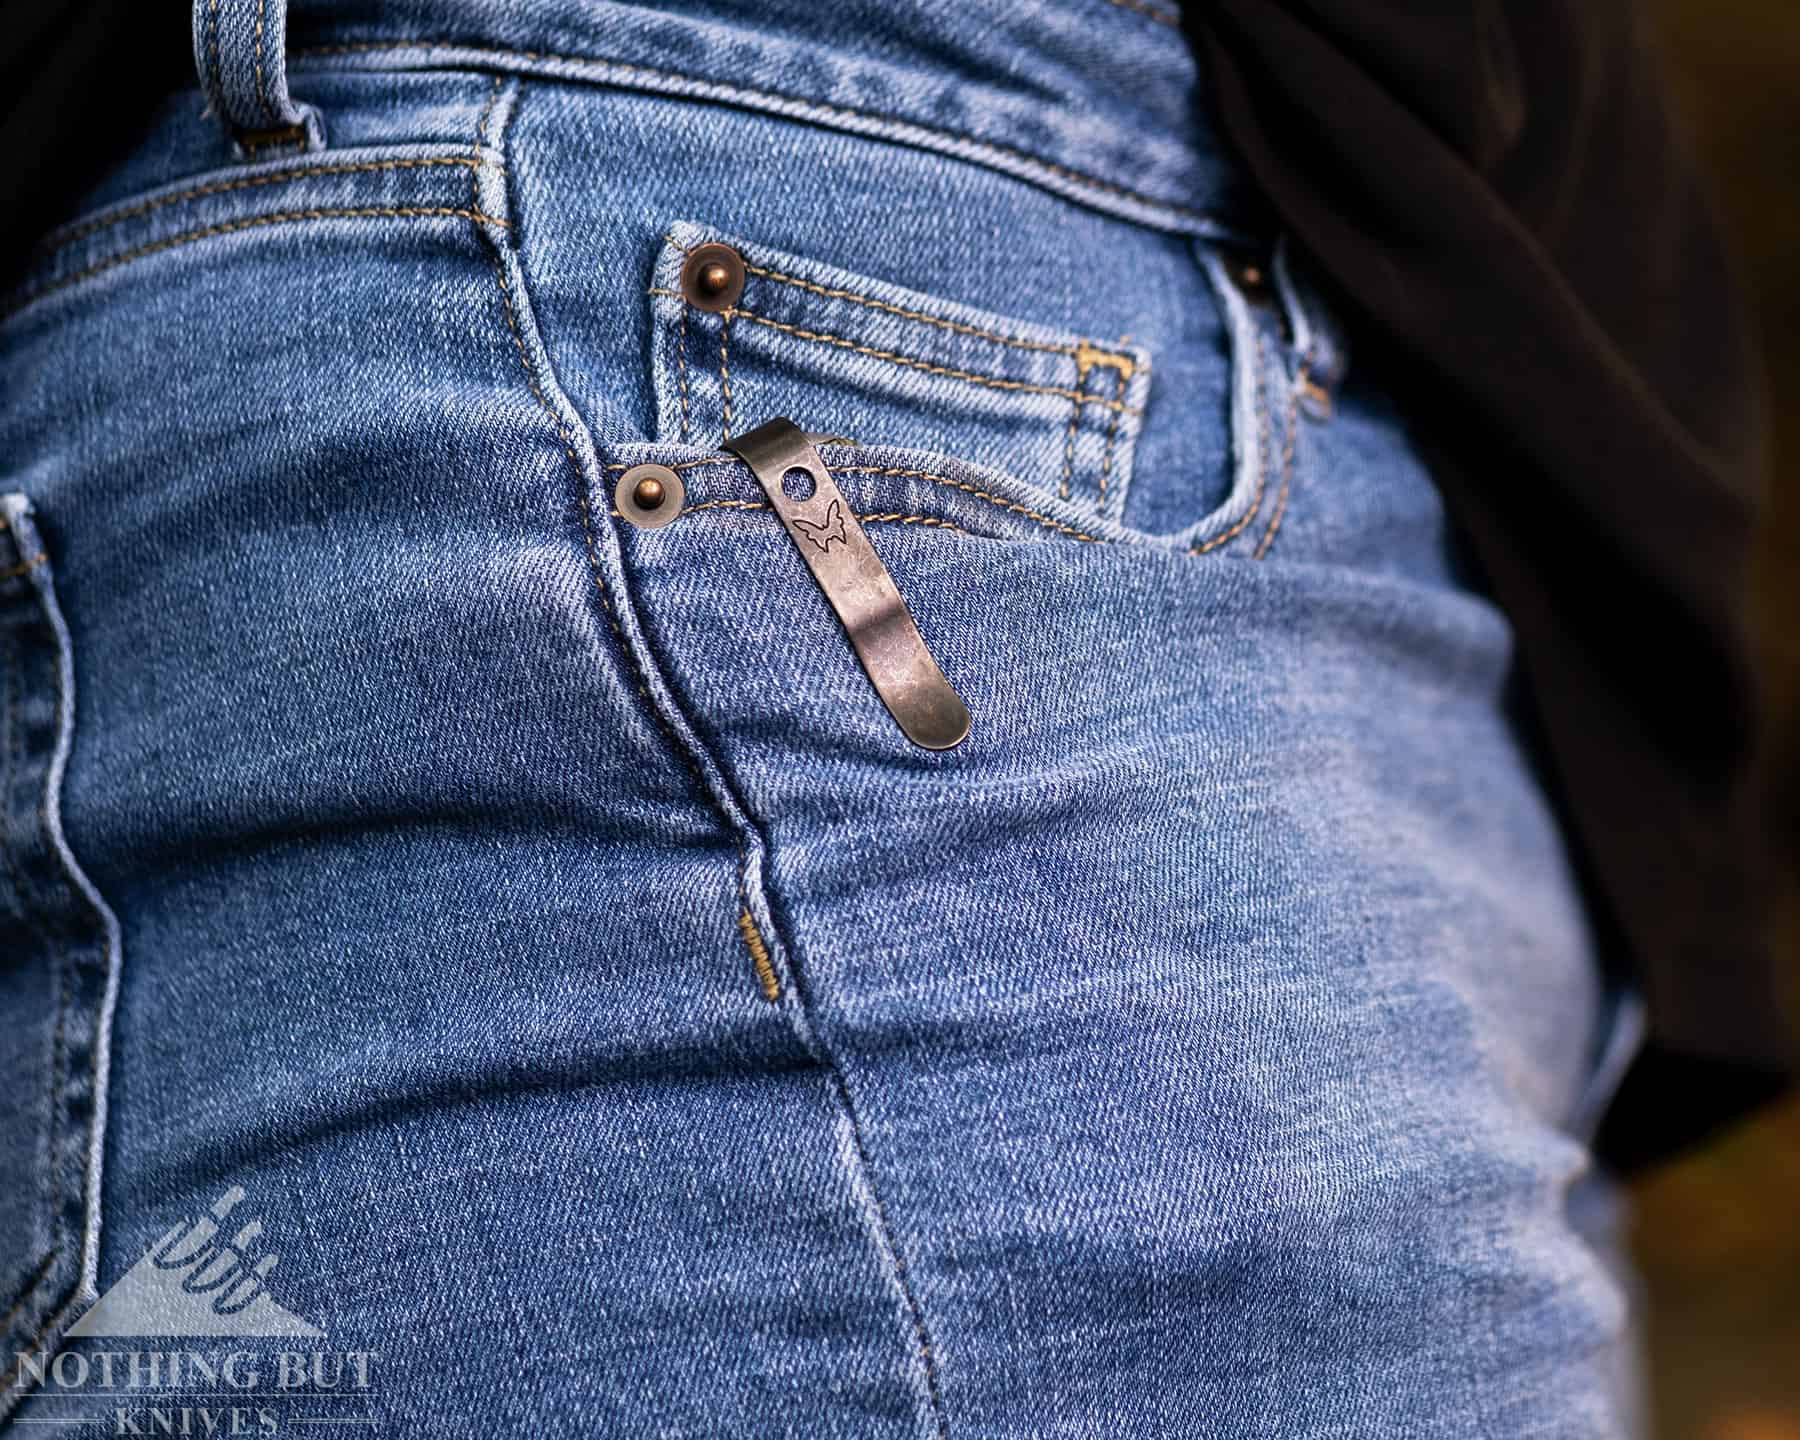 The deep carry Benchmade pocket clip in a person's pocket.